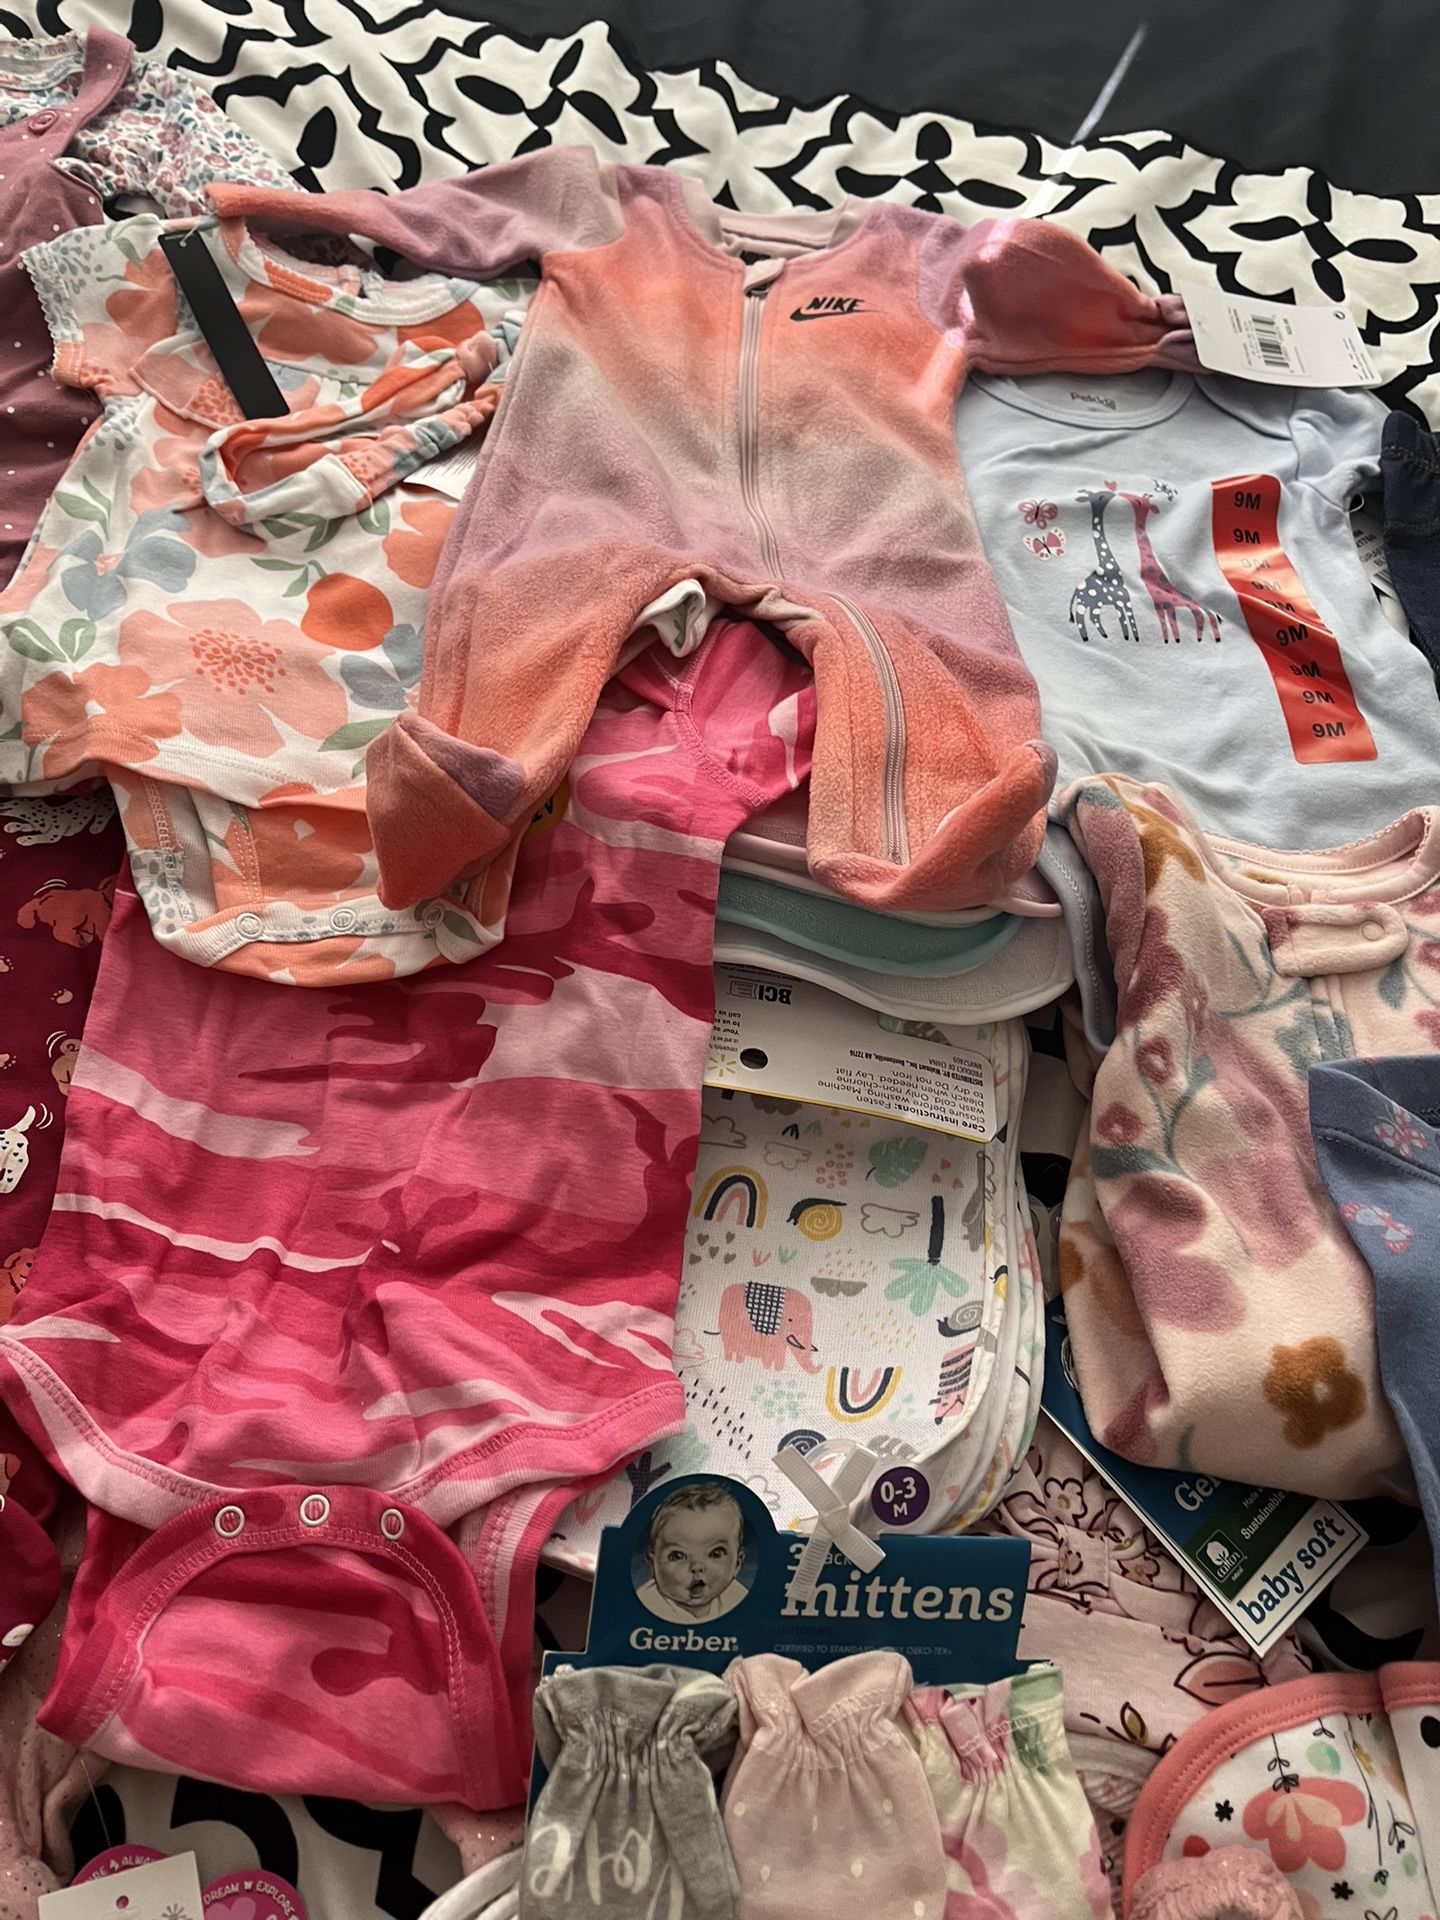 Baby Package Brand New Clothes,hats,blankets, Bibs